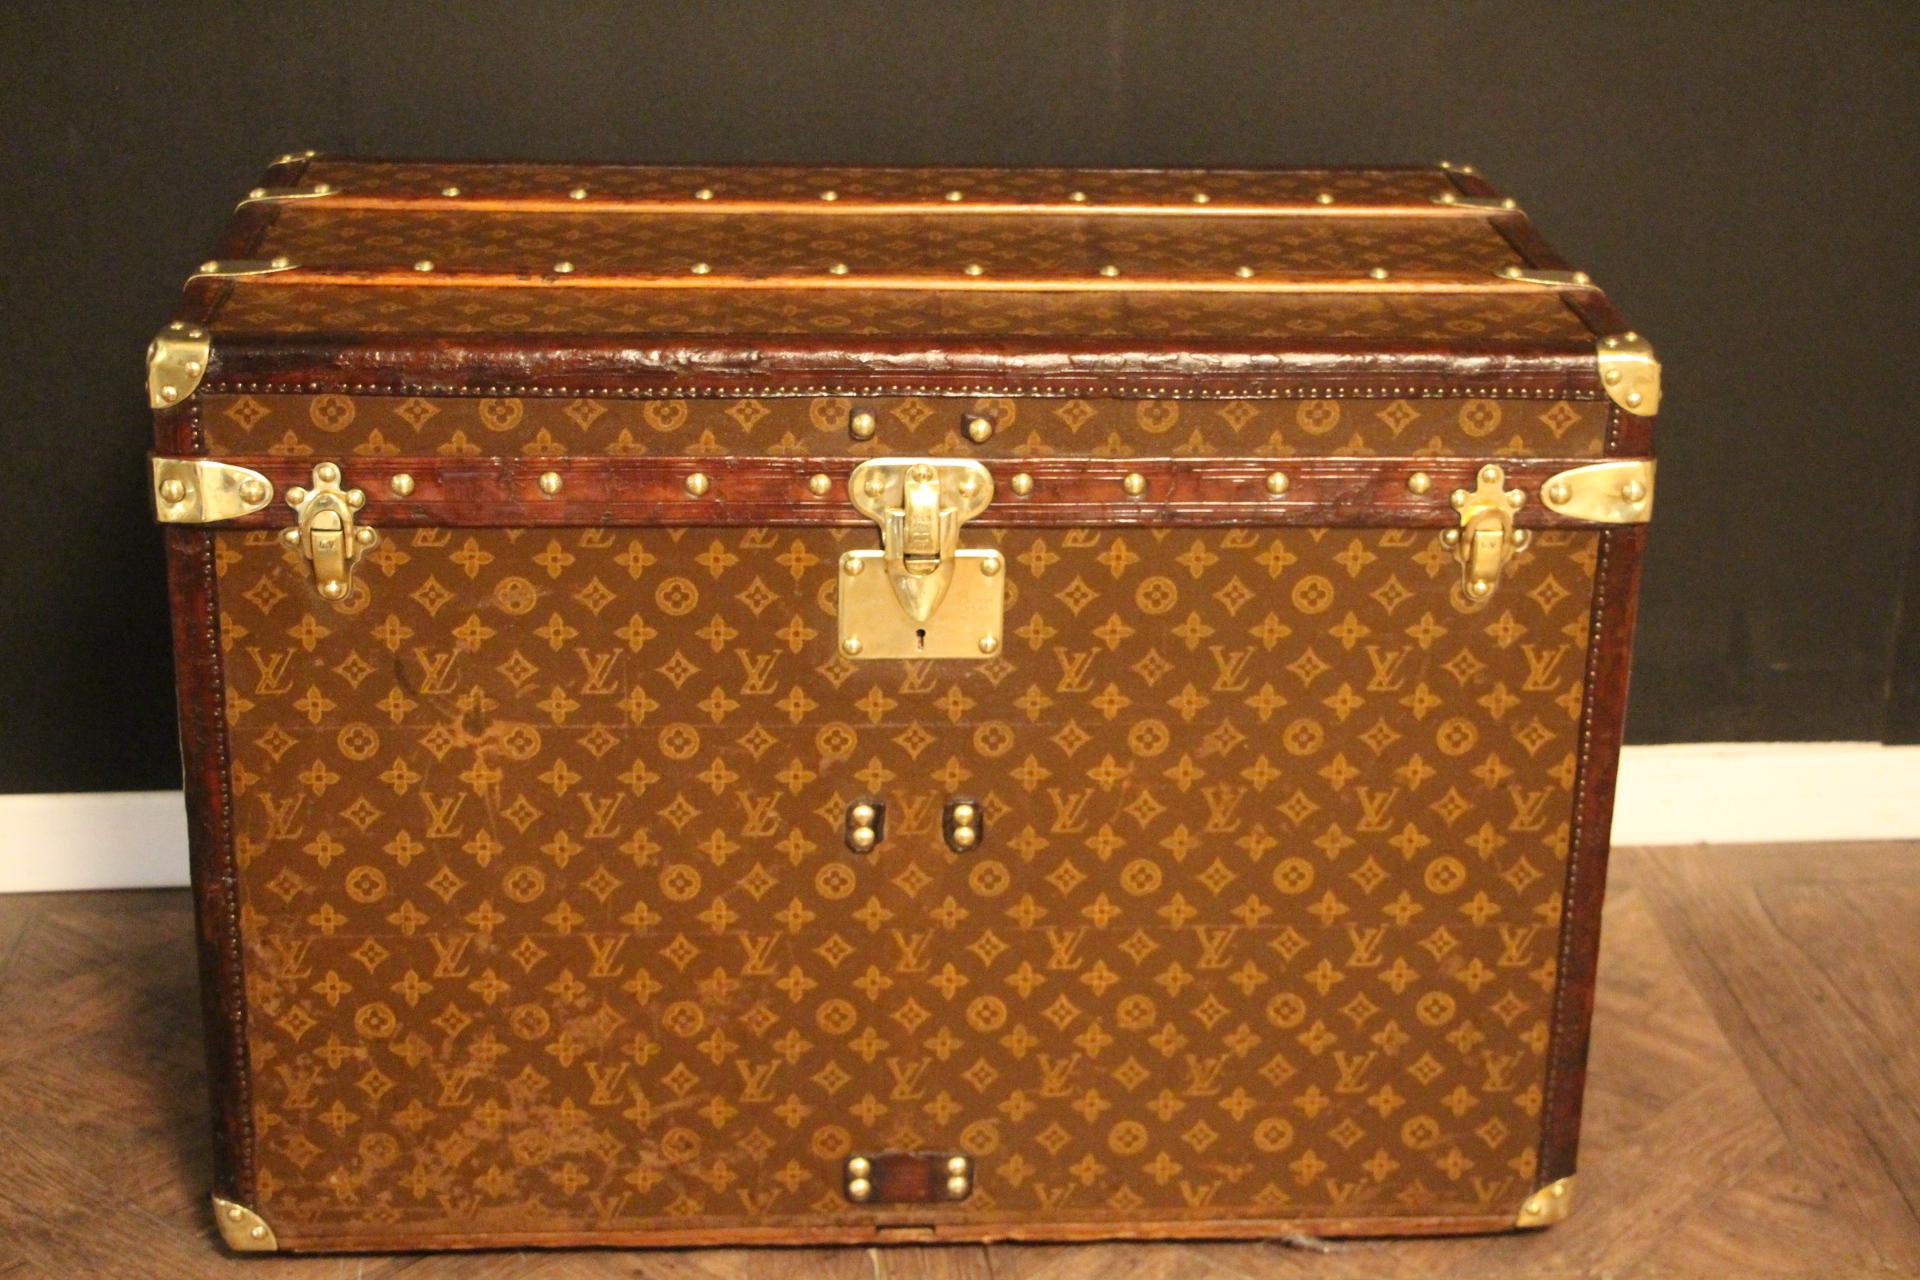 Superb Louis Vuitton steamer trunk featuring stenciled canvas, all leather trim in deep chocolate color, solid brass Louis Vuitton stamped clasps, lock and studs, solid brass corners and solid brass LV stamped side handles. Measure: 75